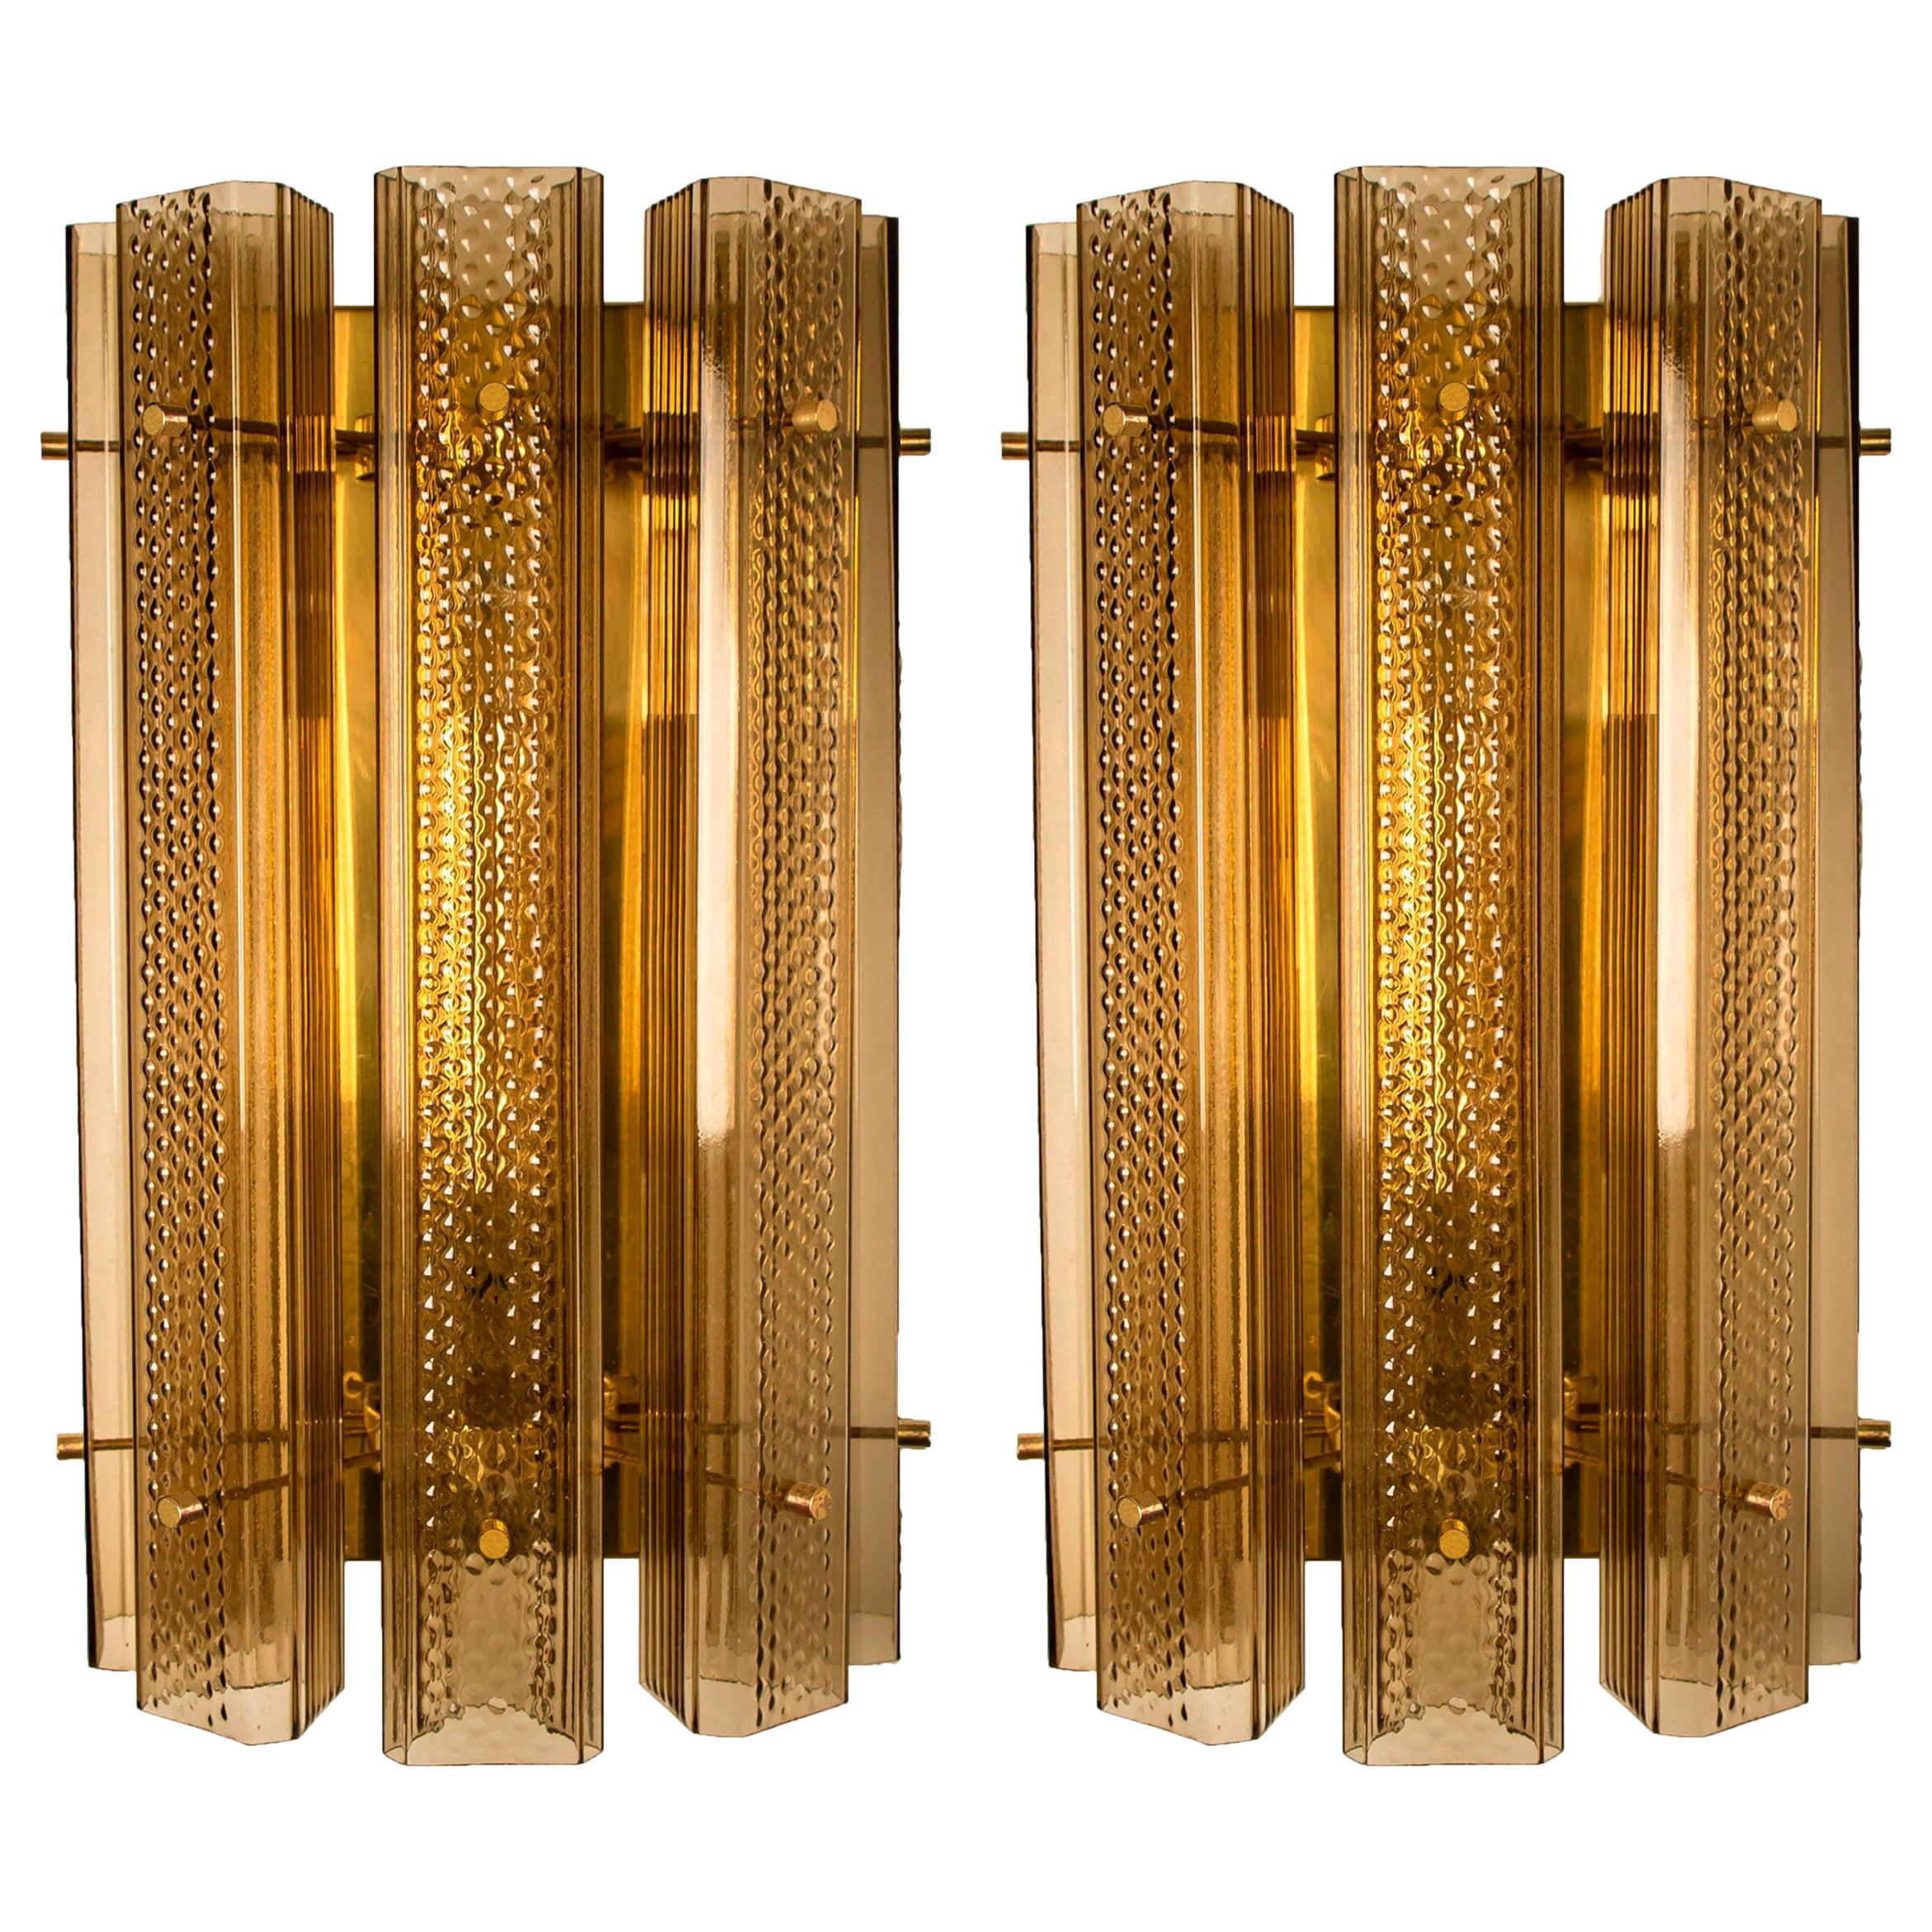 1 of the 3 Pairs of Extra Large Murano Wall Sconces/Wall Lights Glass and Brass